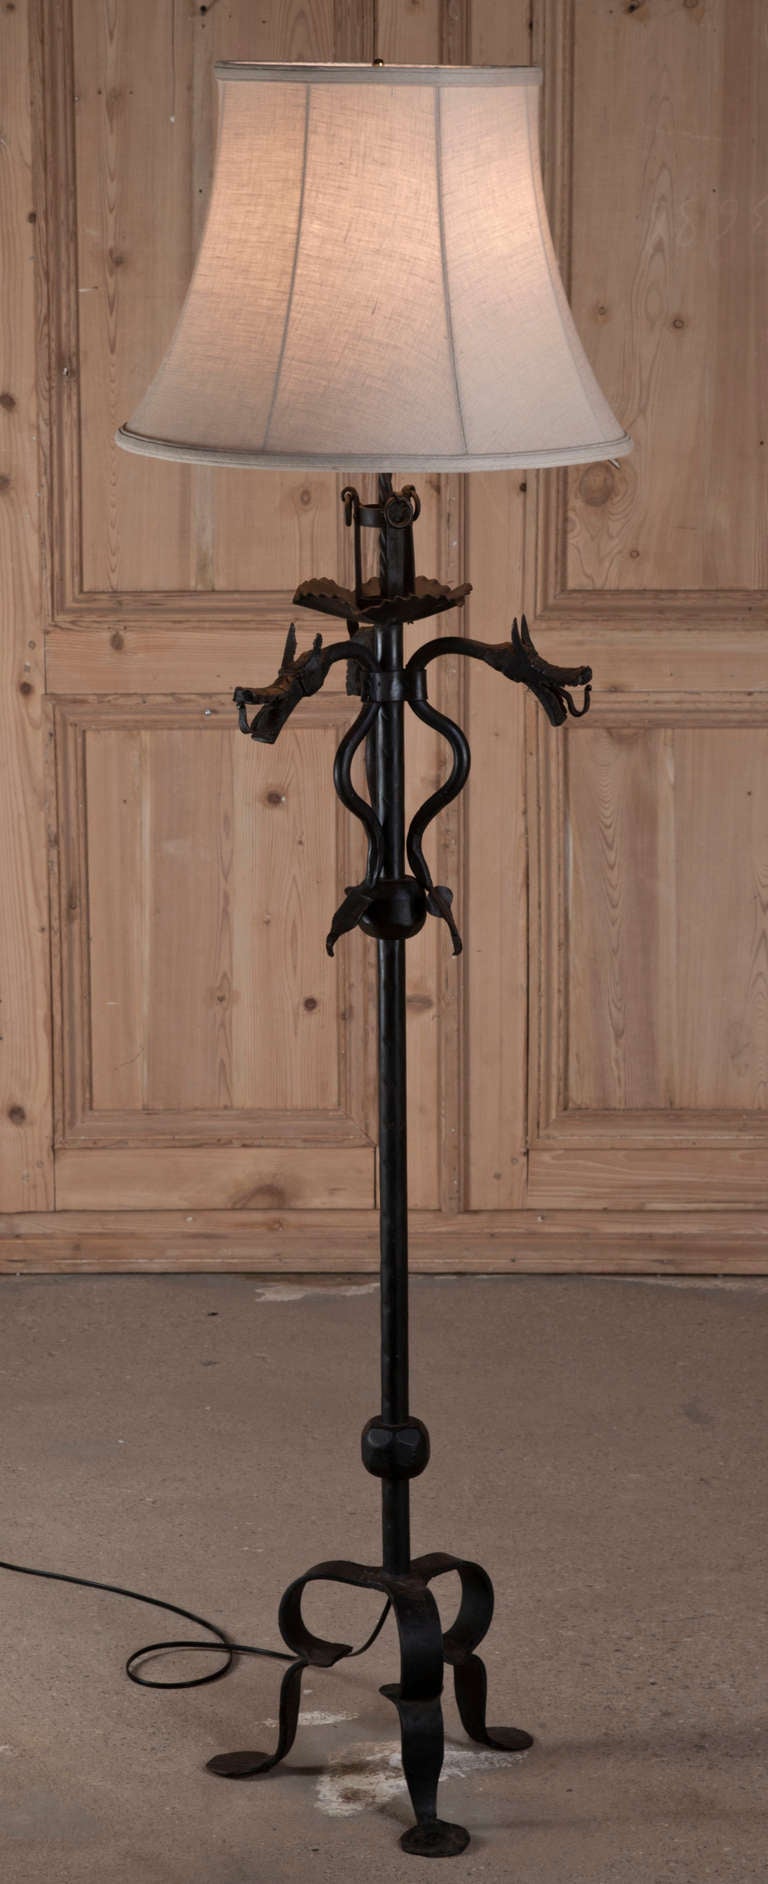 With three fearsome dragons above and a tripod footed base below, this heavy wrought iron floor lamp will be perfect for adding a medieval touch to your decor. Originally used for candles, it has now been wired to UL Standards and fitted with a